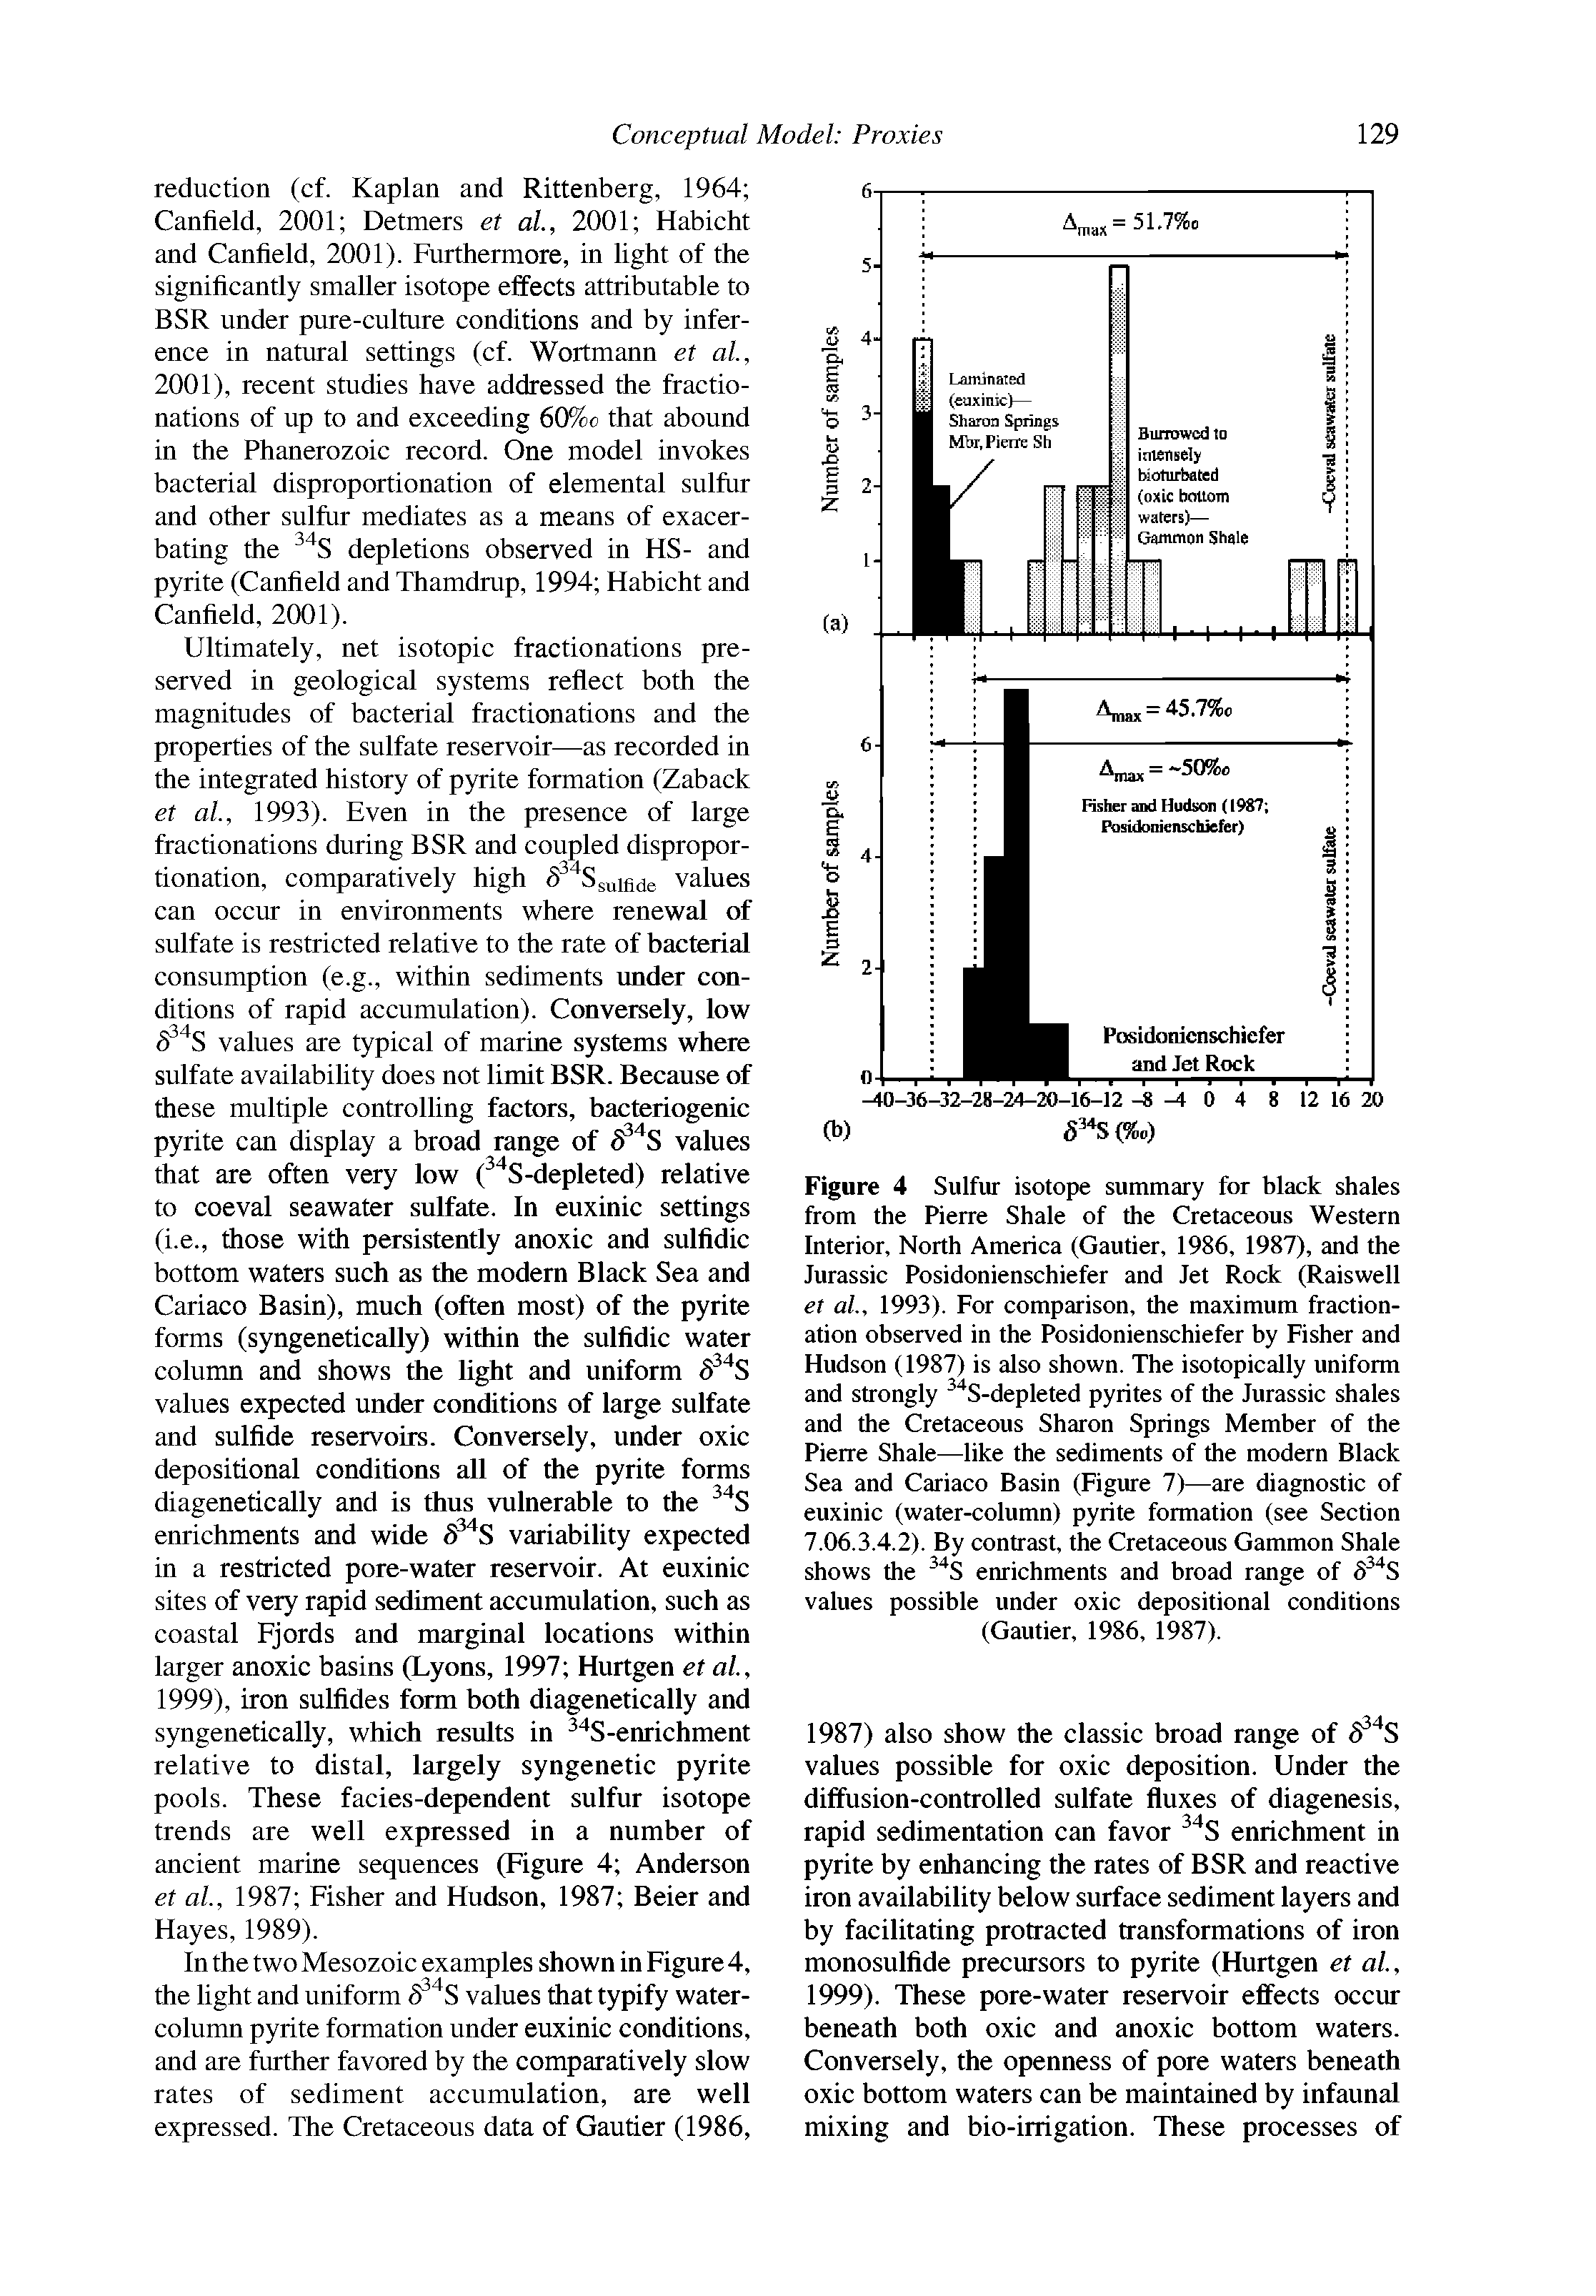 Figure 4 Sulfur isotope summary for black shales from the Pierre Shale of the Cretaceous Western Interior, North America (Gautier, 1986, 1987), and the Jurassic Posidonienschiefer and Jet Rock (Raiswell et al., 1993). For comparison, the maximum fractionation observed in the Posidonienschiefer by Fisher and Hudson (1987) is also shown. The isotopically uniform and strongly S-depleted pyrites of the Jurassic shales and the Cretaceous Sharon Springs Member of the Pierre Shale—like the sediments of the modern Black Sea and Cariaco Basin (Figure 7)—are diagnostic of euxinic (water-column) pyrite formation (see Section 7.06.3.4.2). By contrast, the Cretaceous Gammon Shale shows the S enrichments and broad range of 6 S values possible under oxic depositional conditions (Gautier, 1986, 1987).